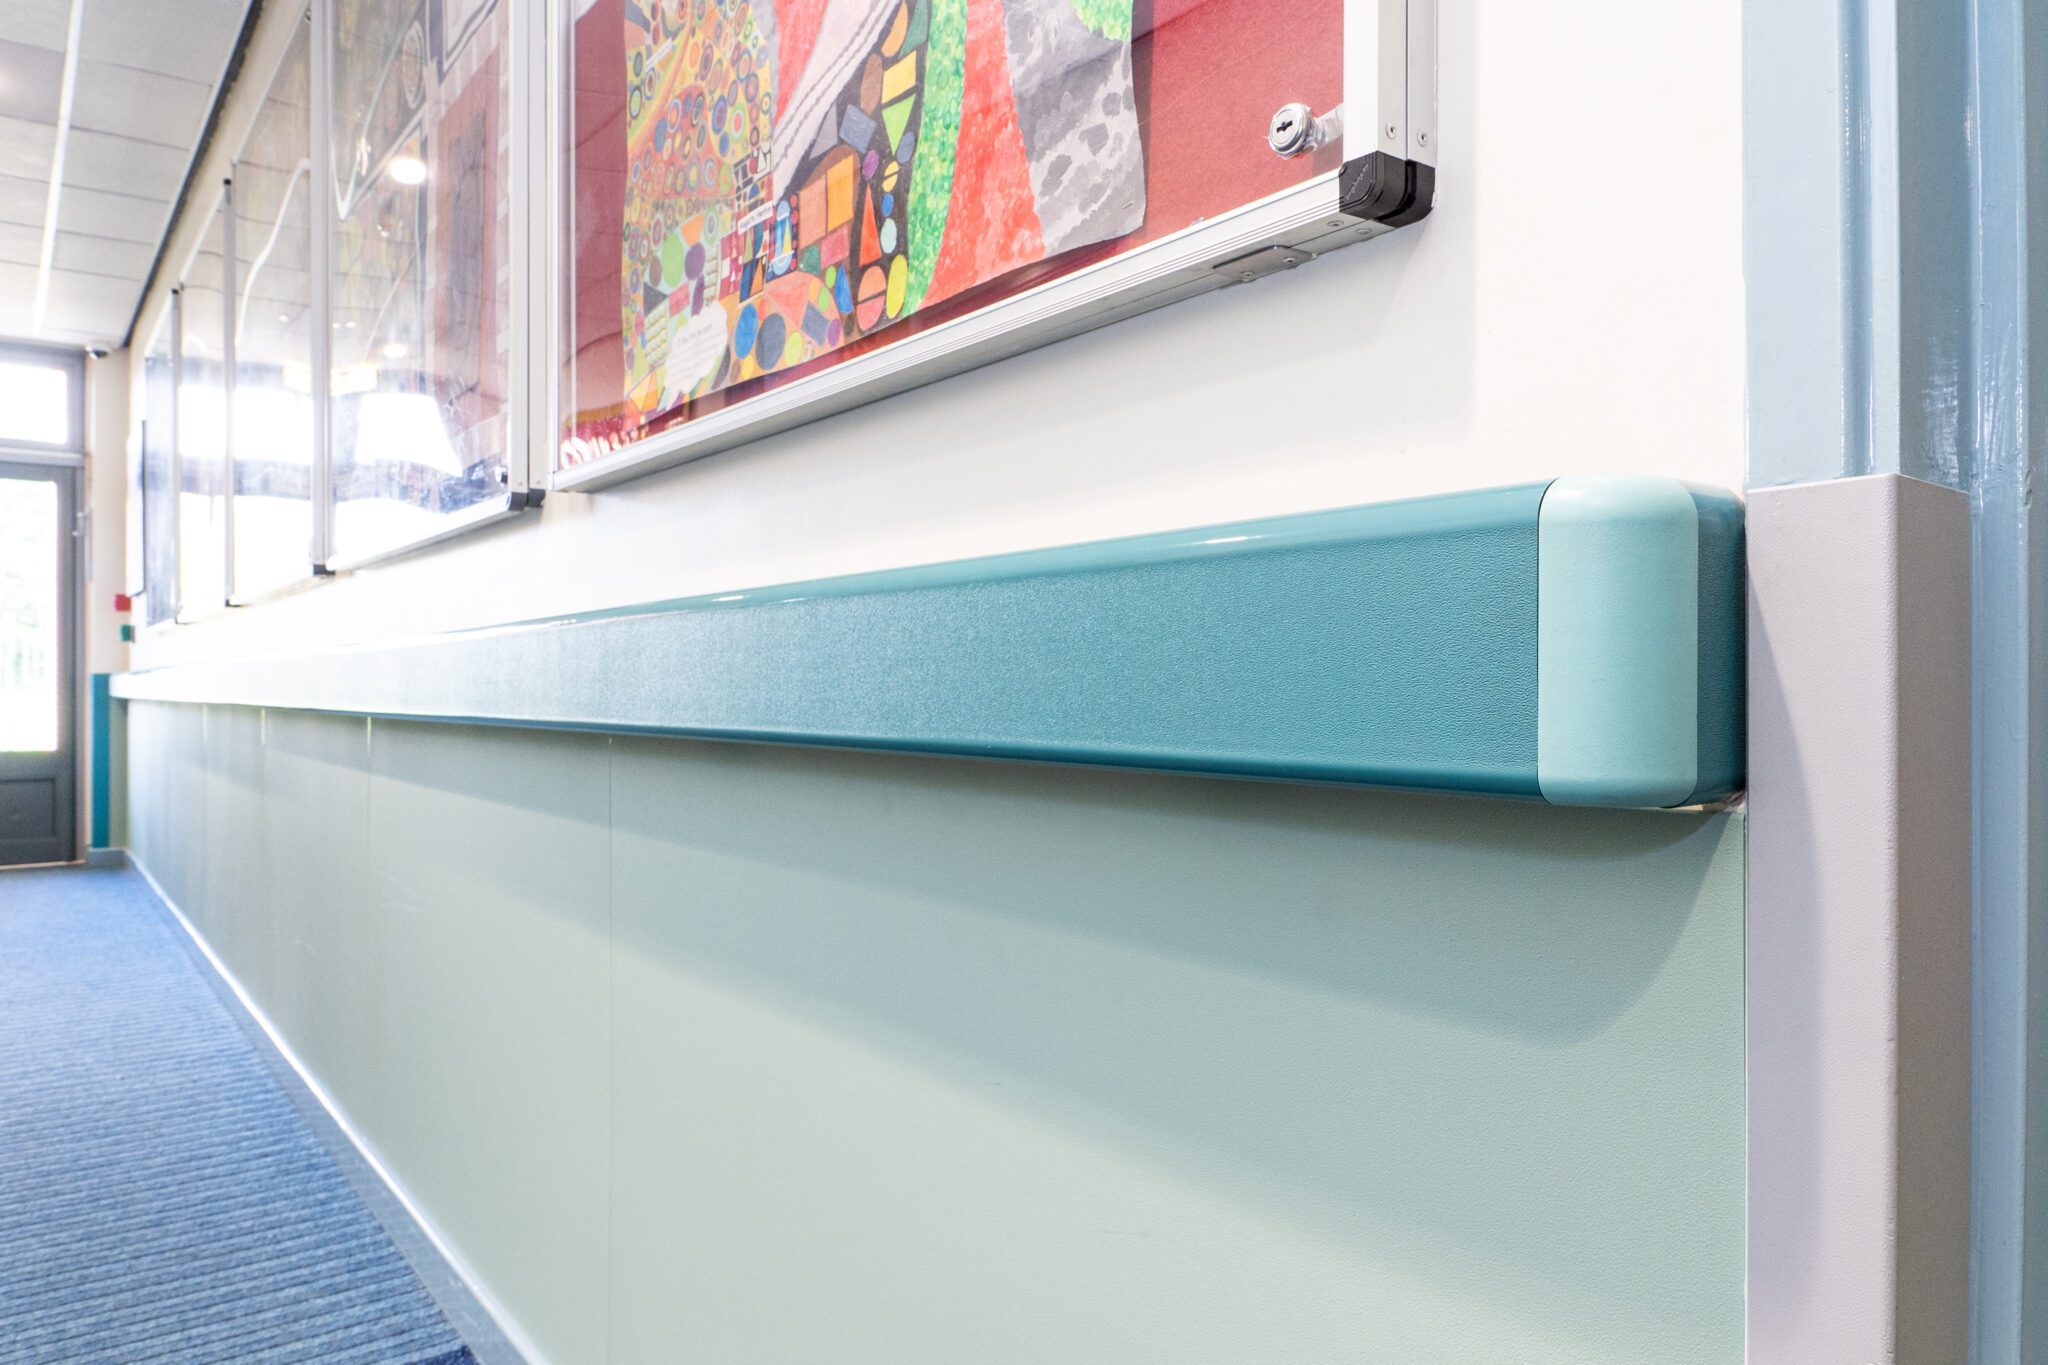 Yeoman Shield Extends Wall Lifecycles at School